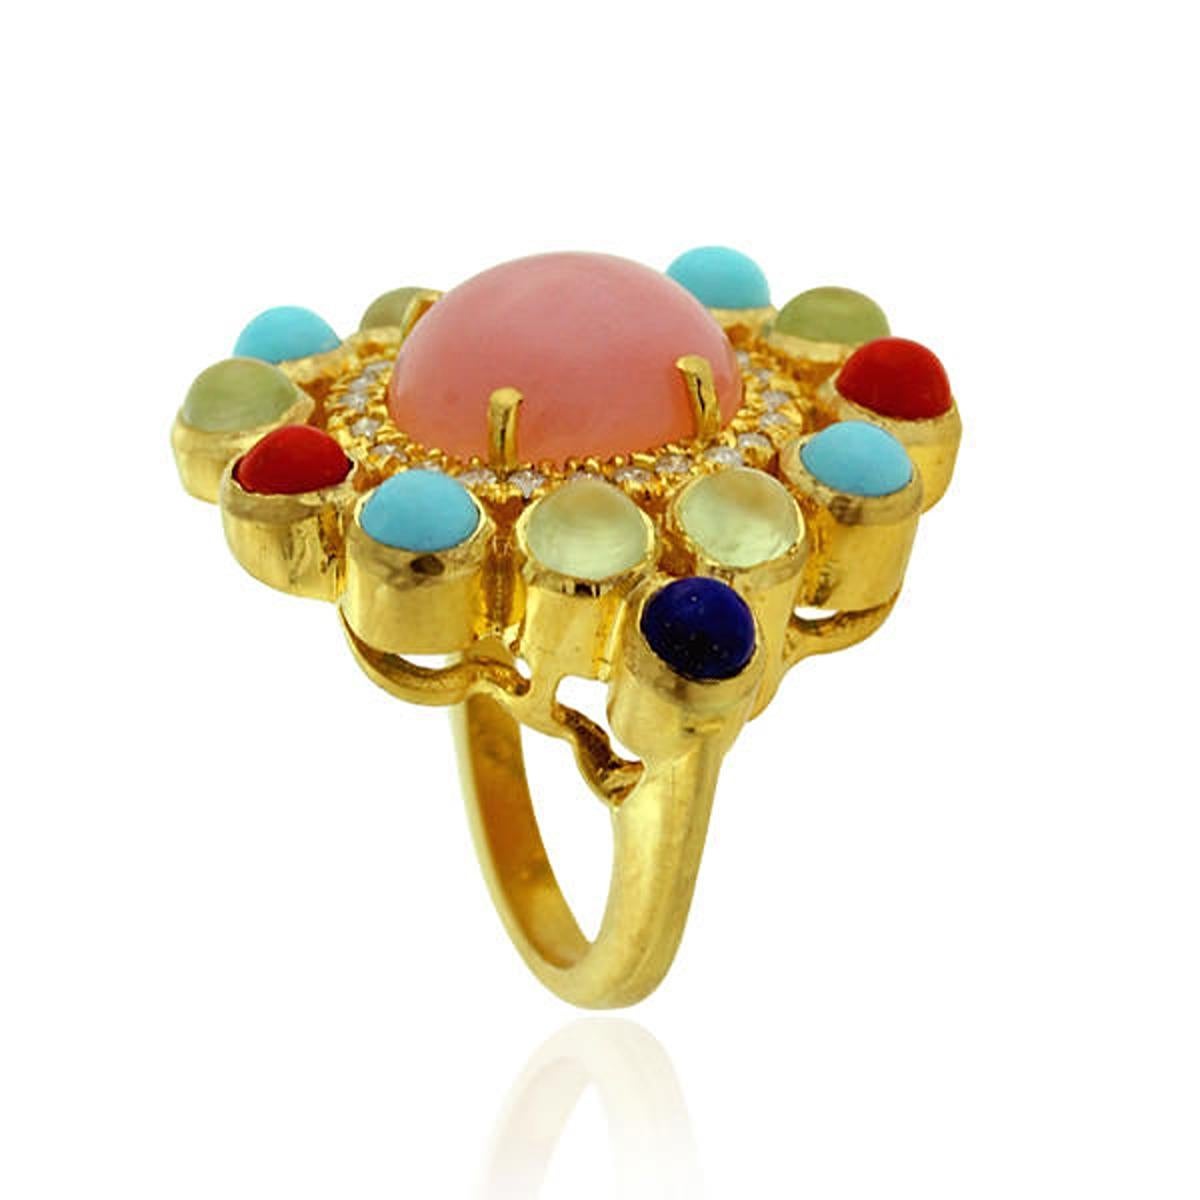 Mixed Cut Flower Shaped Multi Stone Ring With Diamonds Made In 18k Gold For Sale